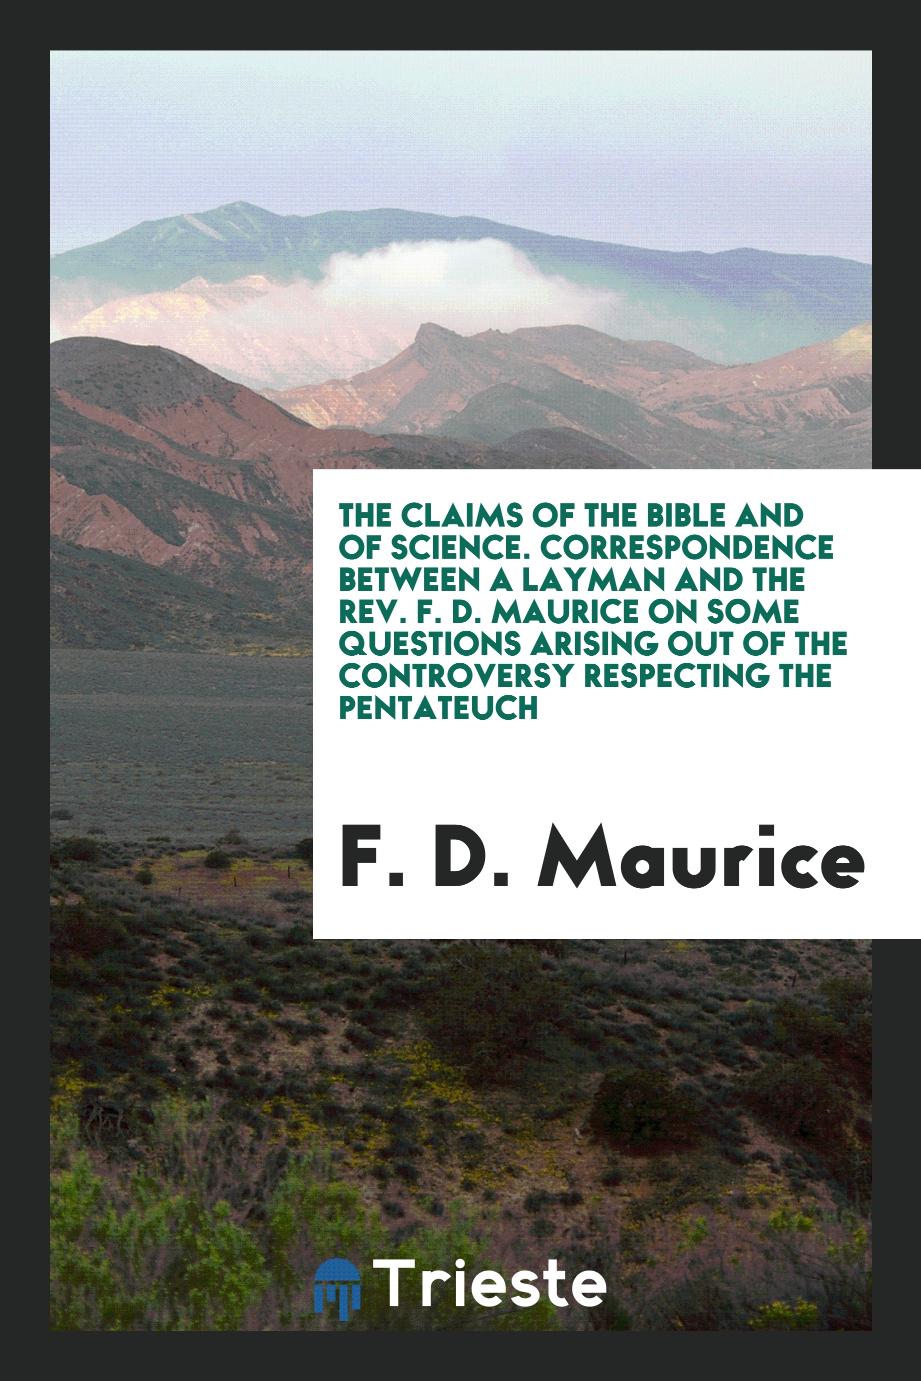 The Claims of the Bible and of Science. Correspondence Between a Layman and the Rev. F. D. Maurice on Some Questions Arising out of the Controversy Respecting the Pentateuch